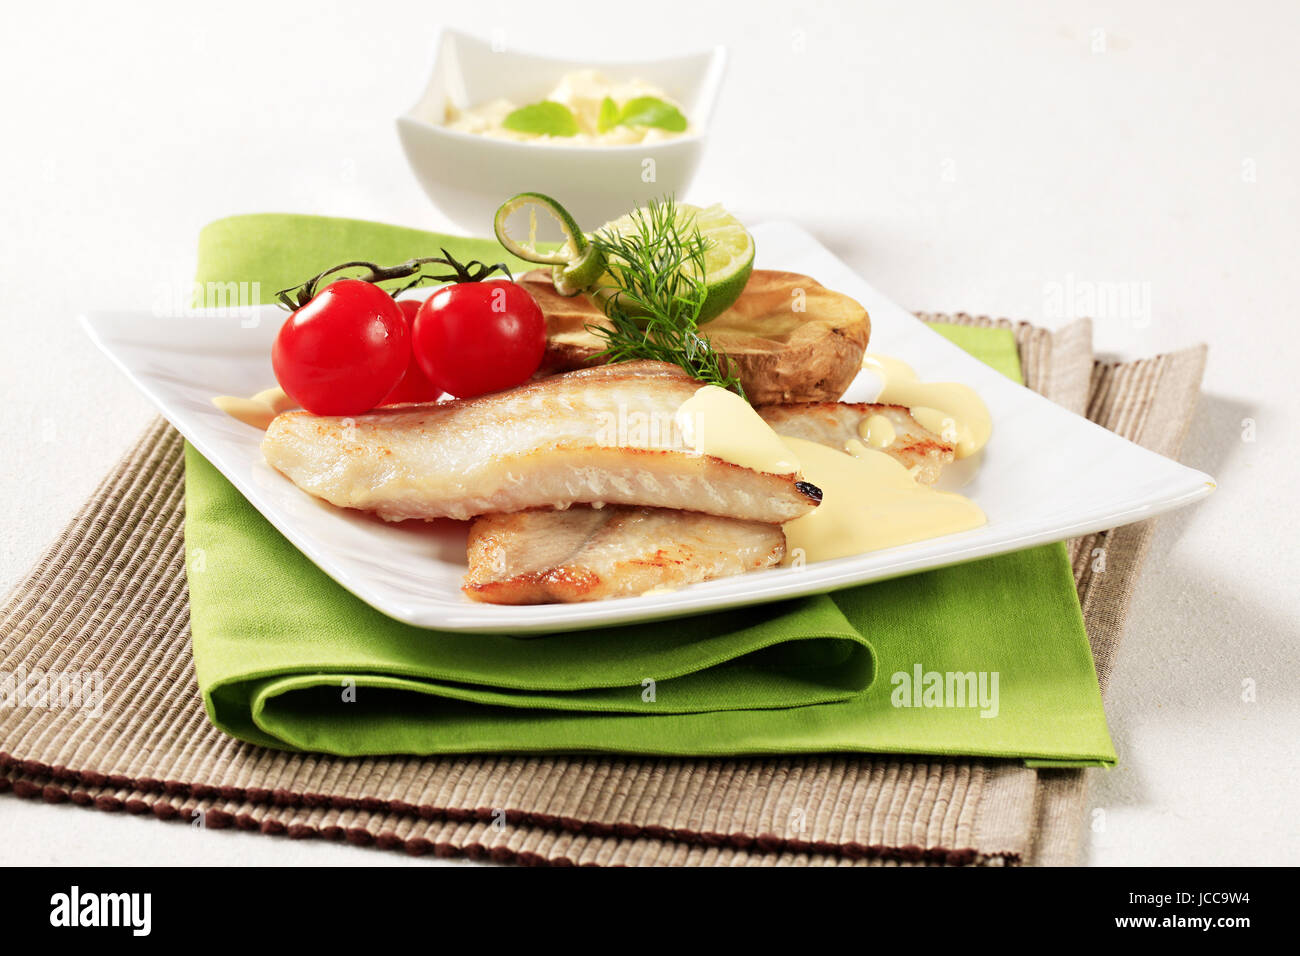 Pan fried fish fillets with roasted potato Stock Photo